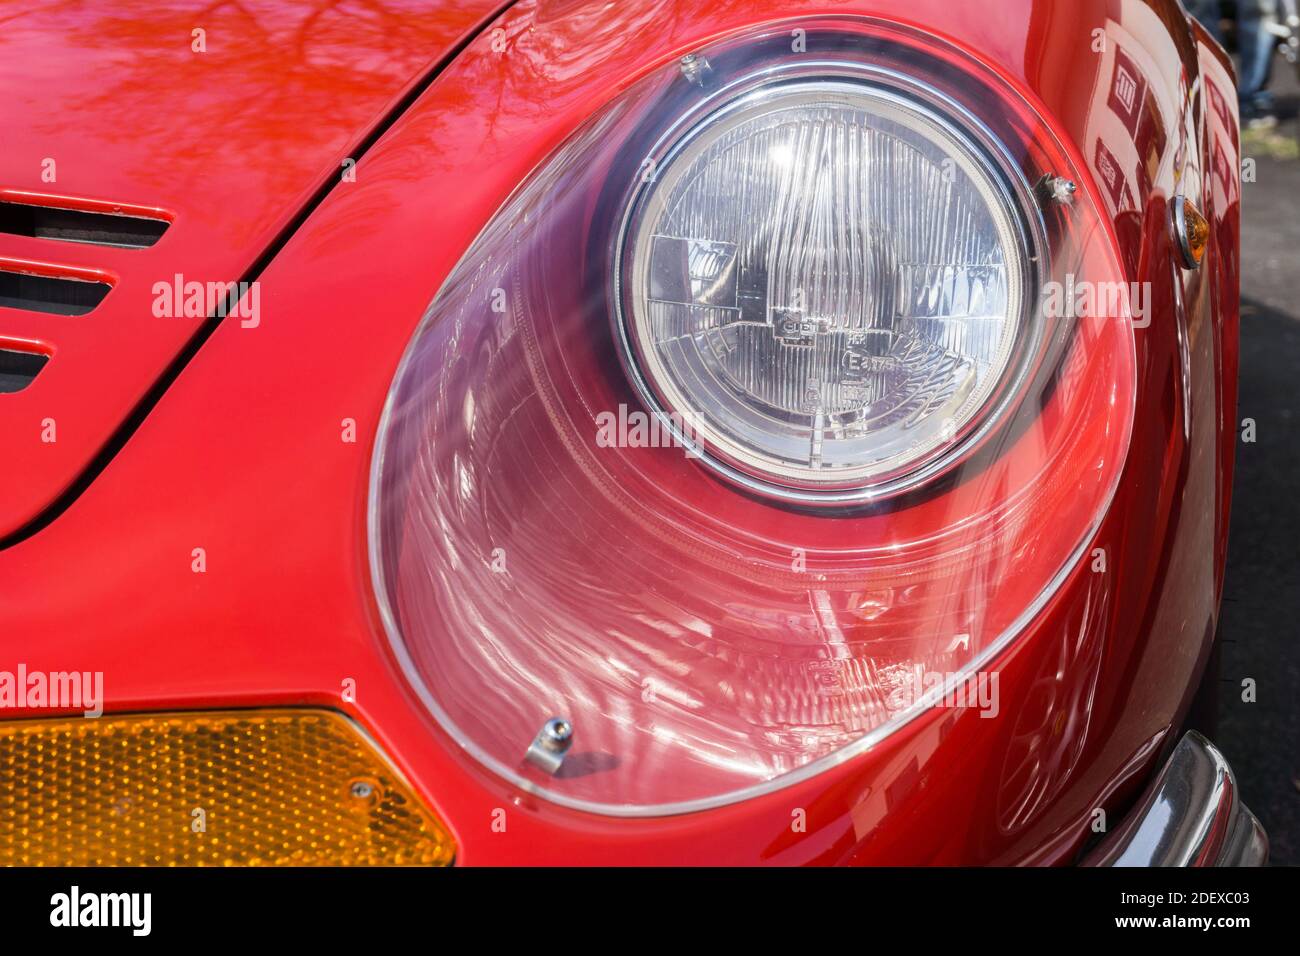 Close up detail of the headlight and bonnet on a red 1970s Ferrari Dino 246 GT sports car Stock Photo